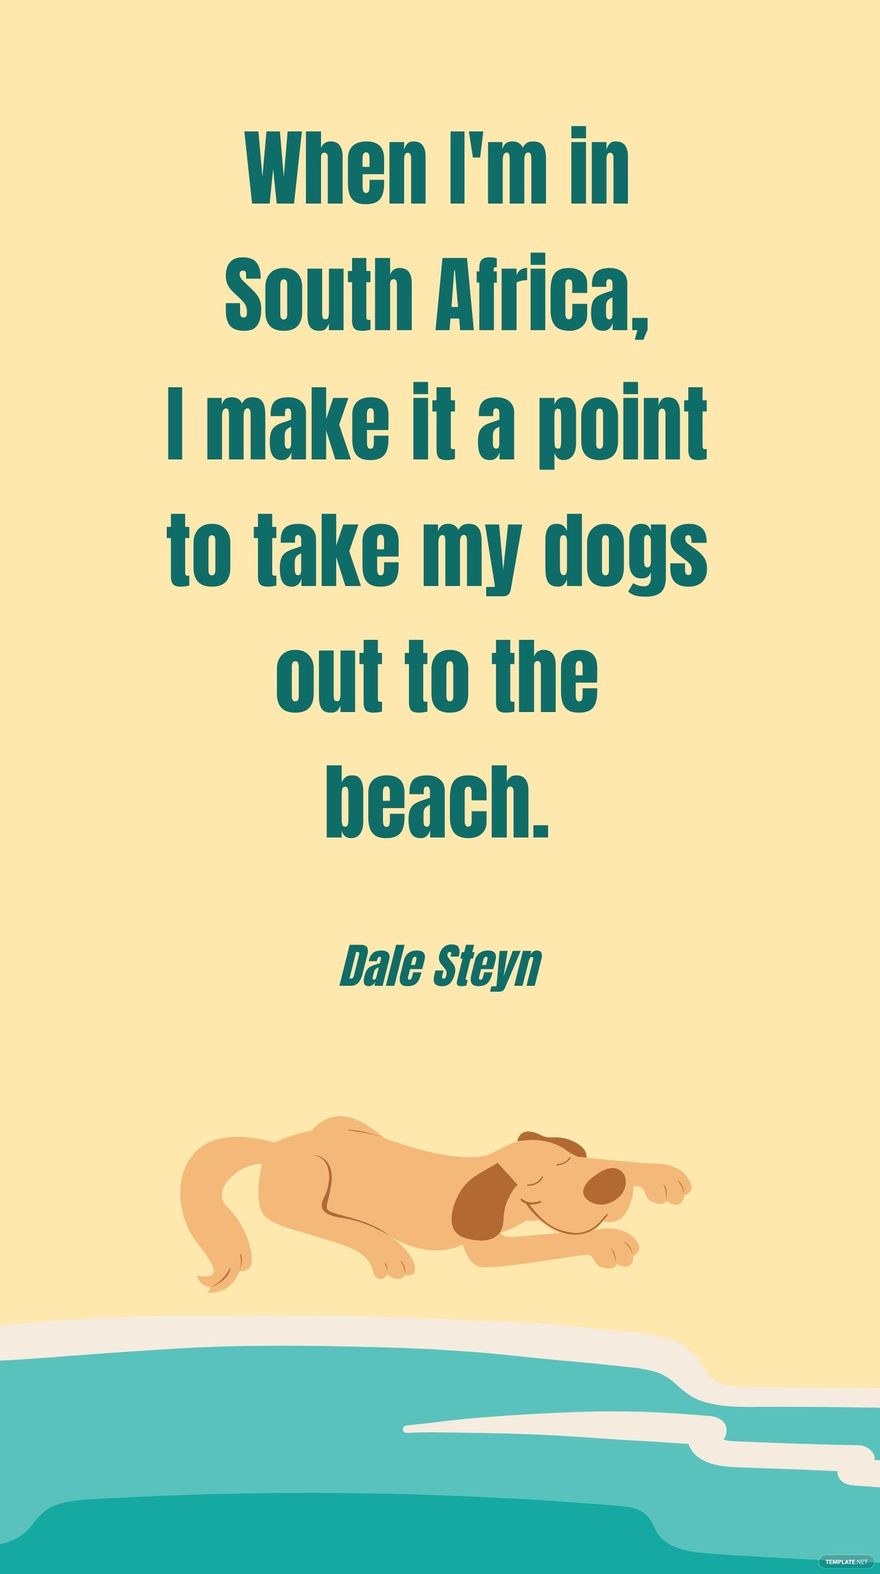 Free Dale Steyn - When I'm in South Africa, I make it a point to take my dogs out to the beach.